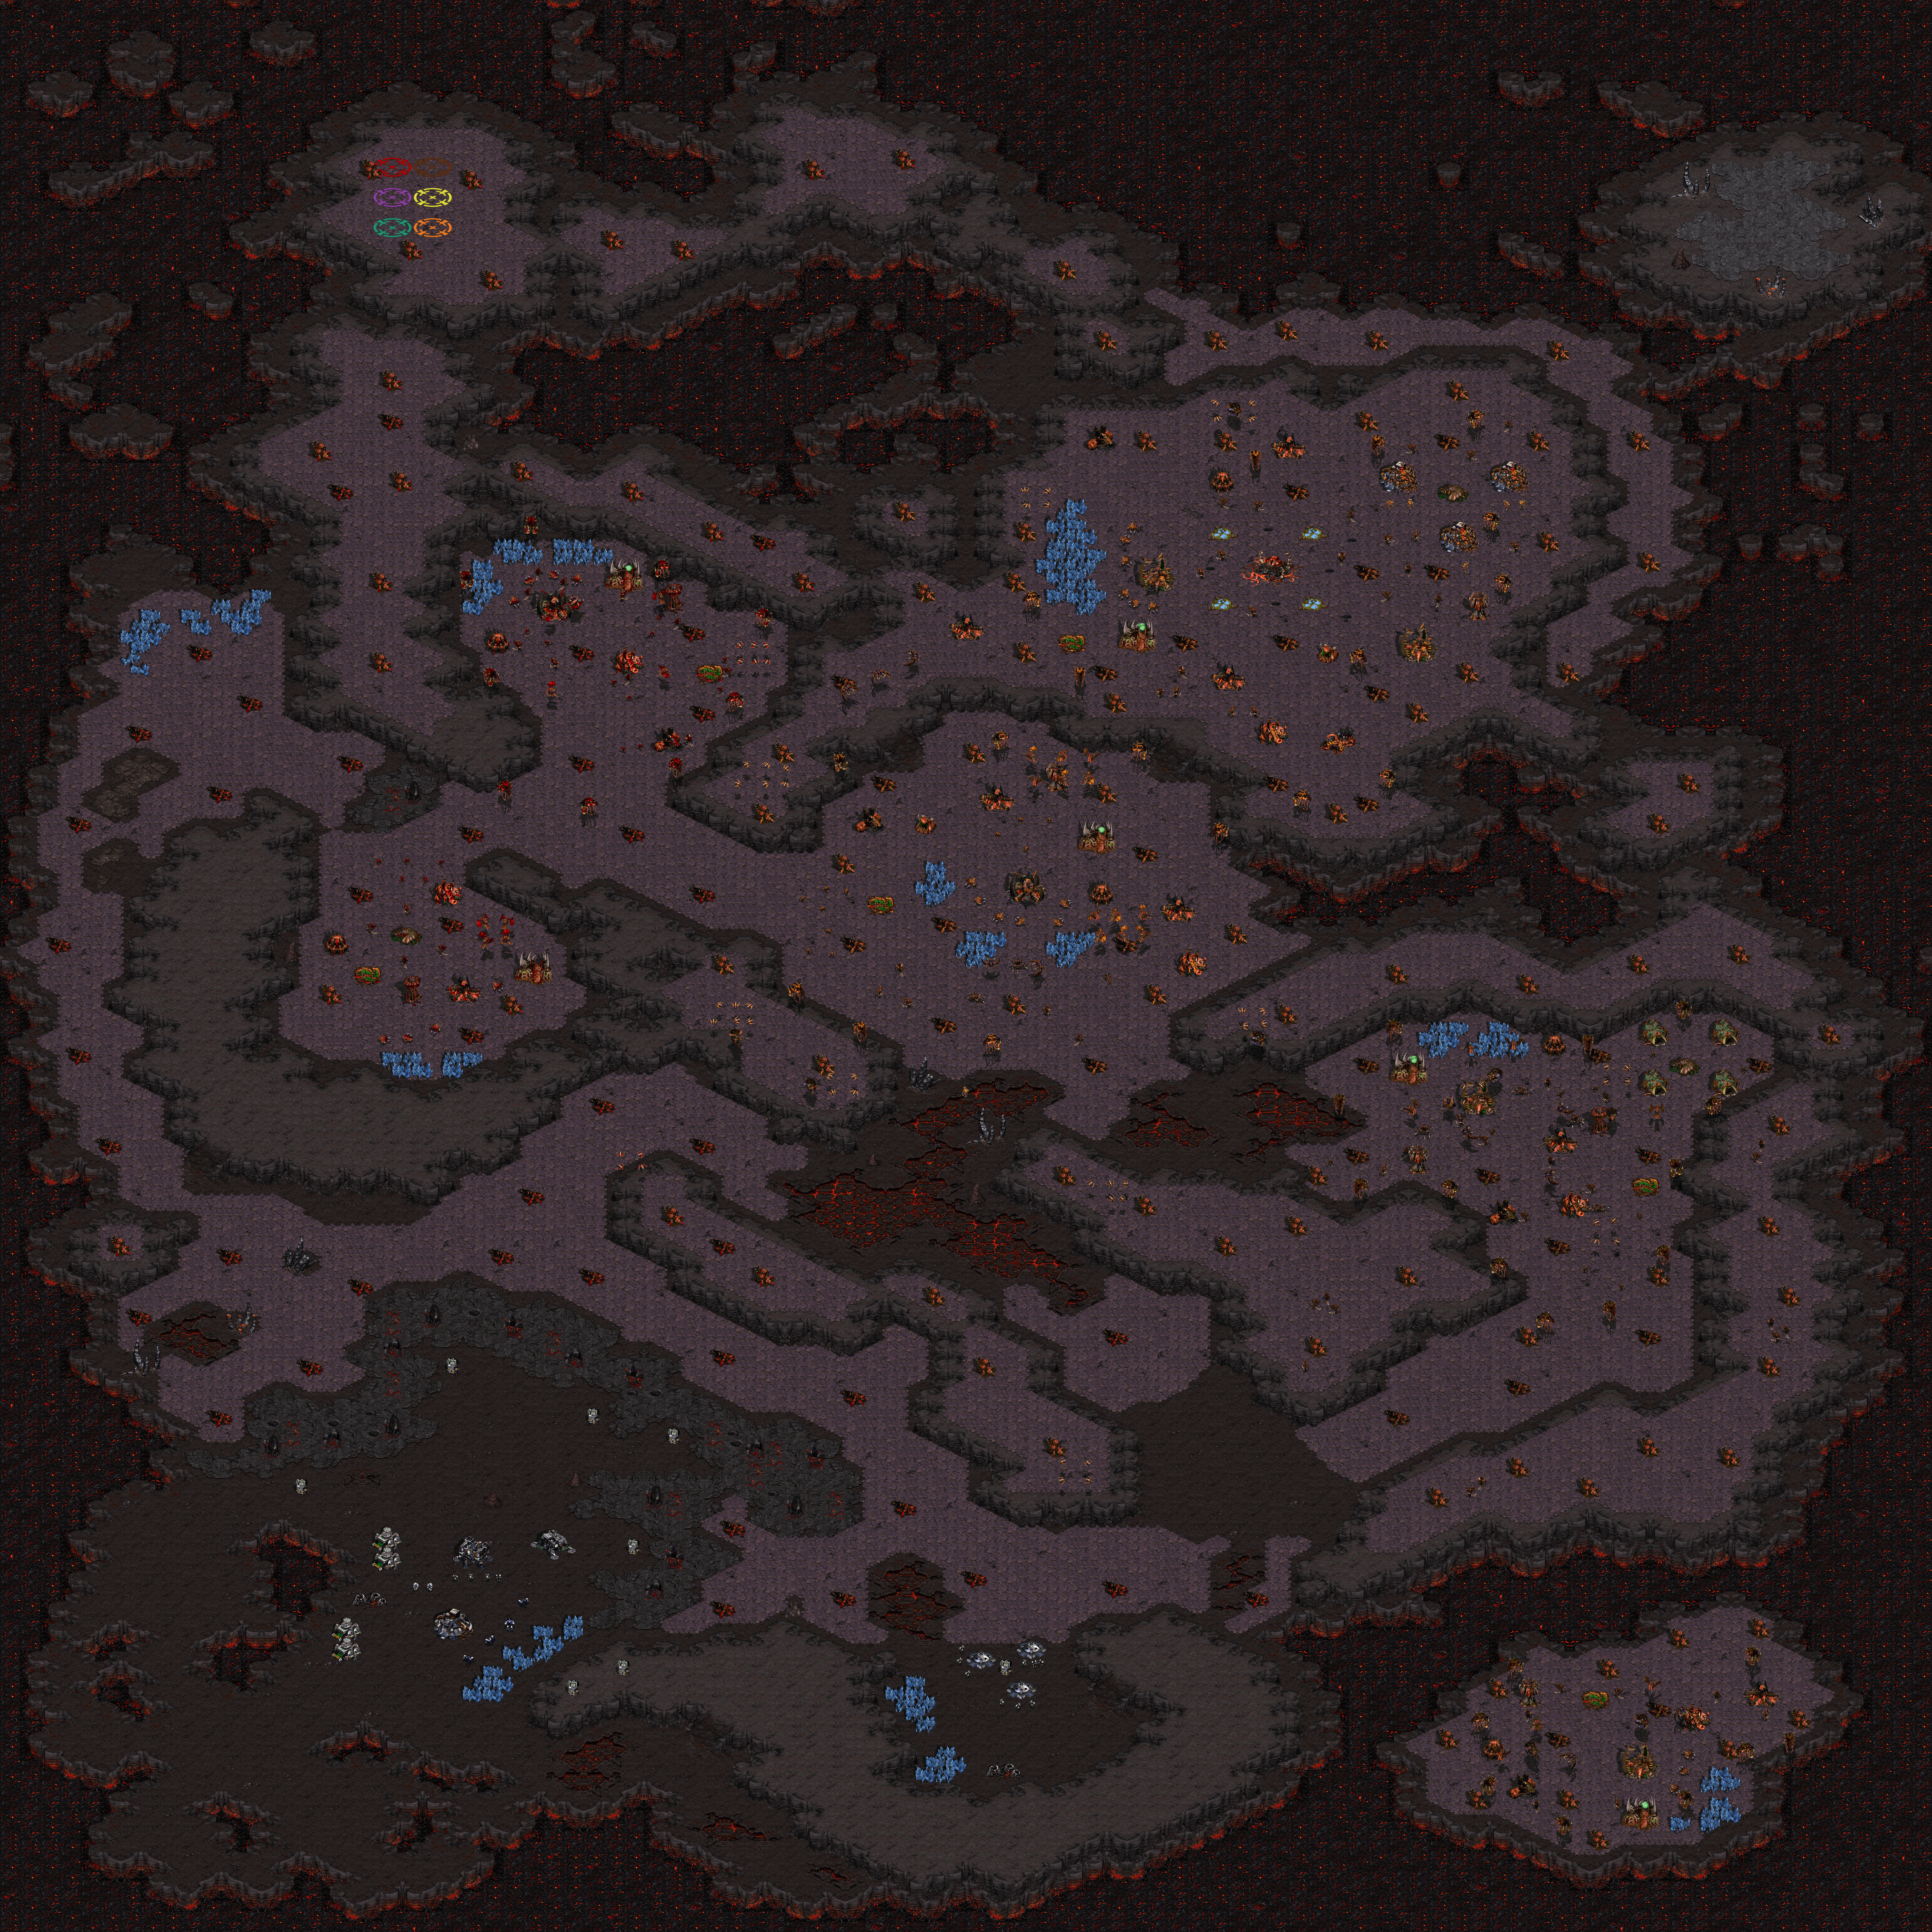 The Terran Dissolution - A Starcraft Post Broodwar Warlords Game